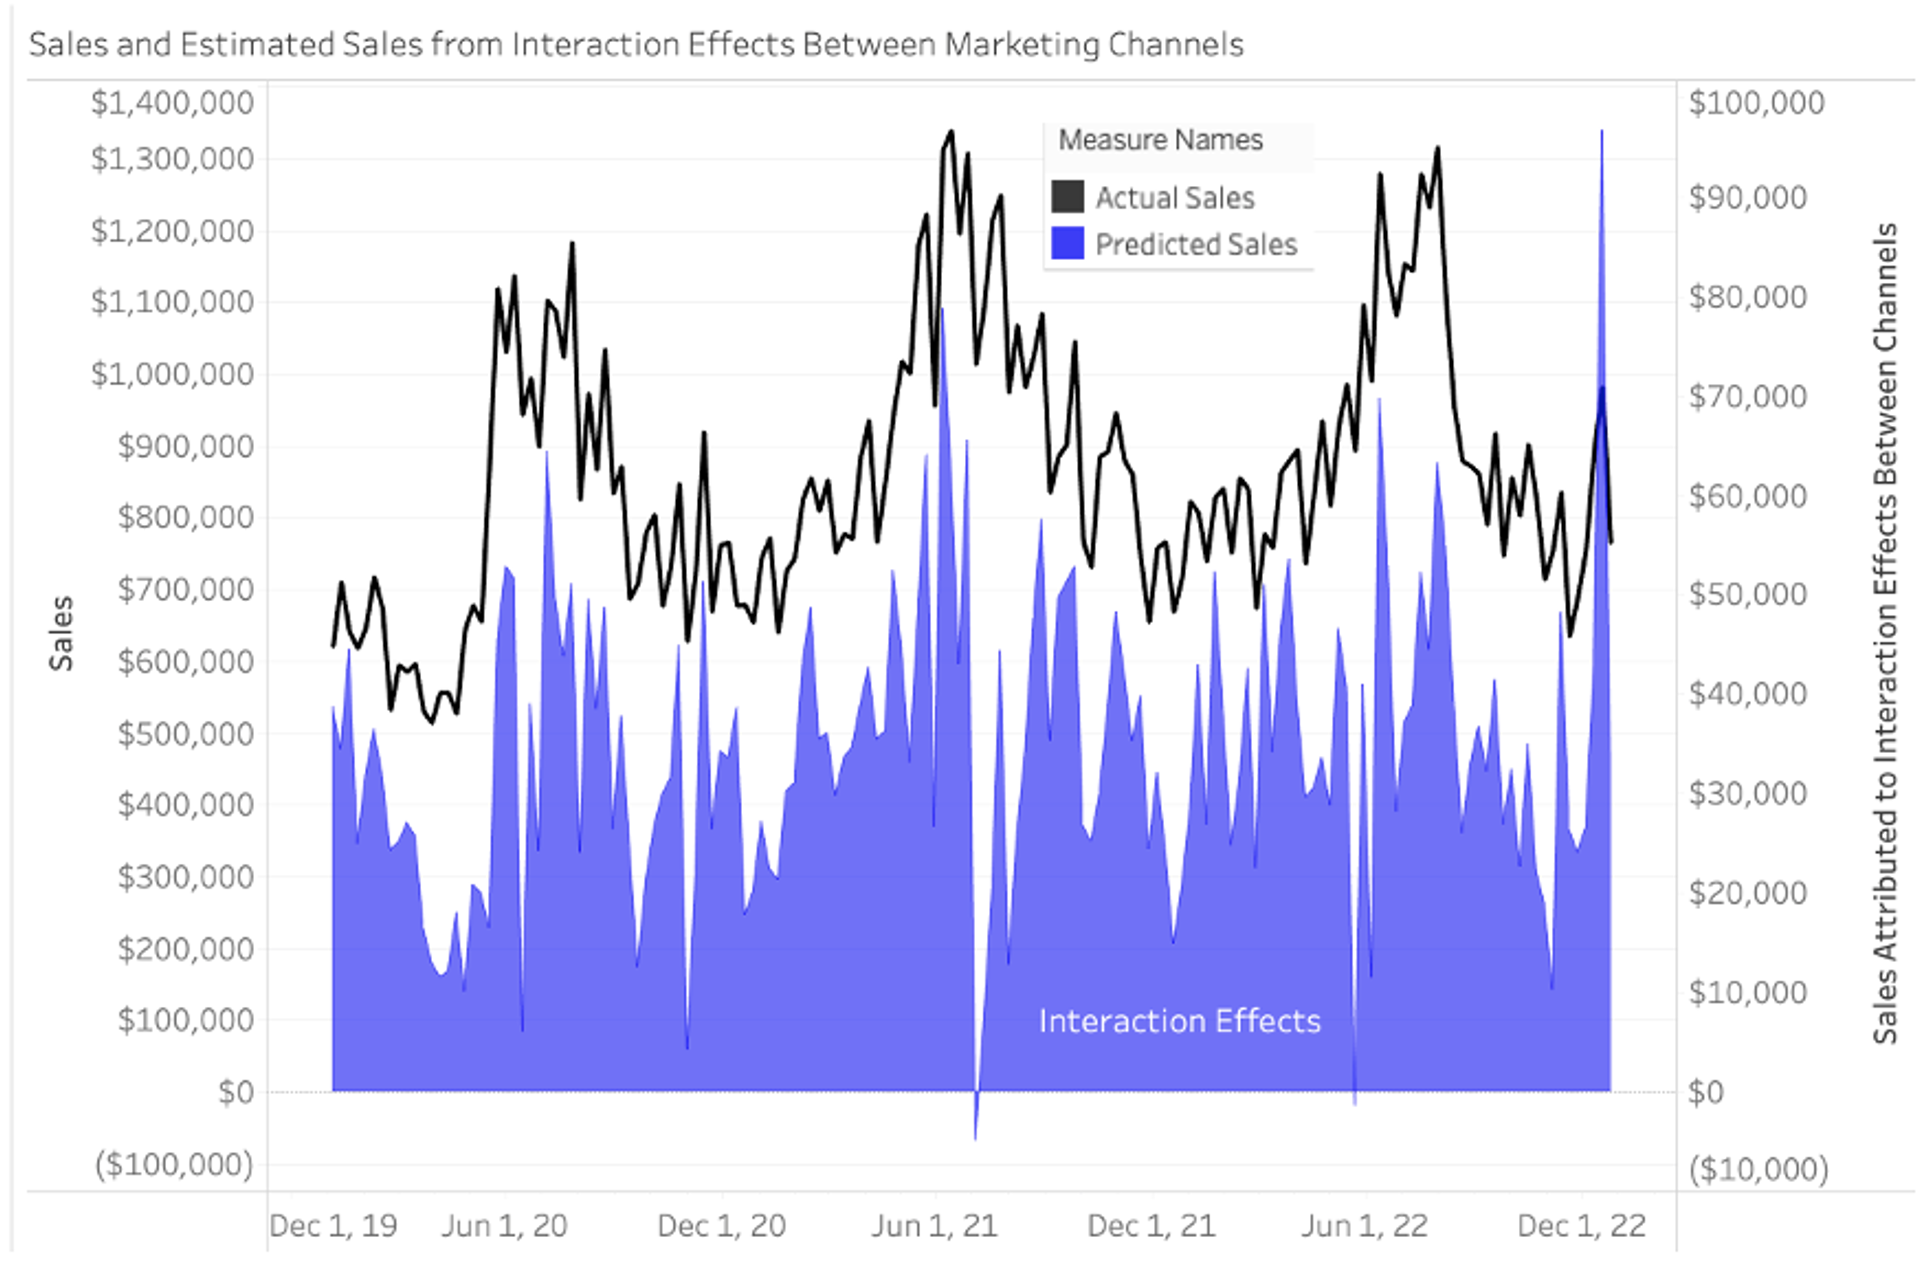 Figure 3: Estimated sales due to Interaction Effects between marketing channels